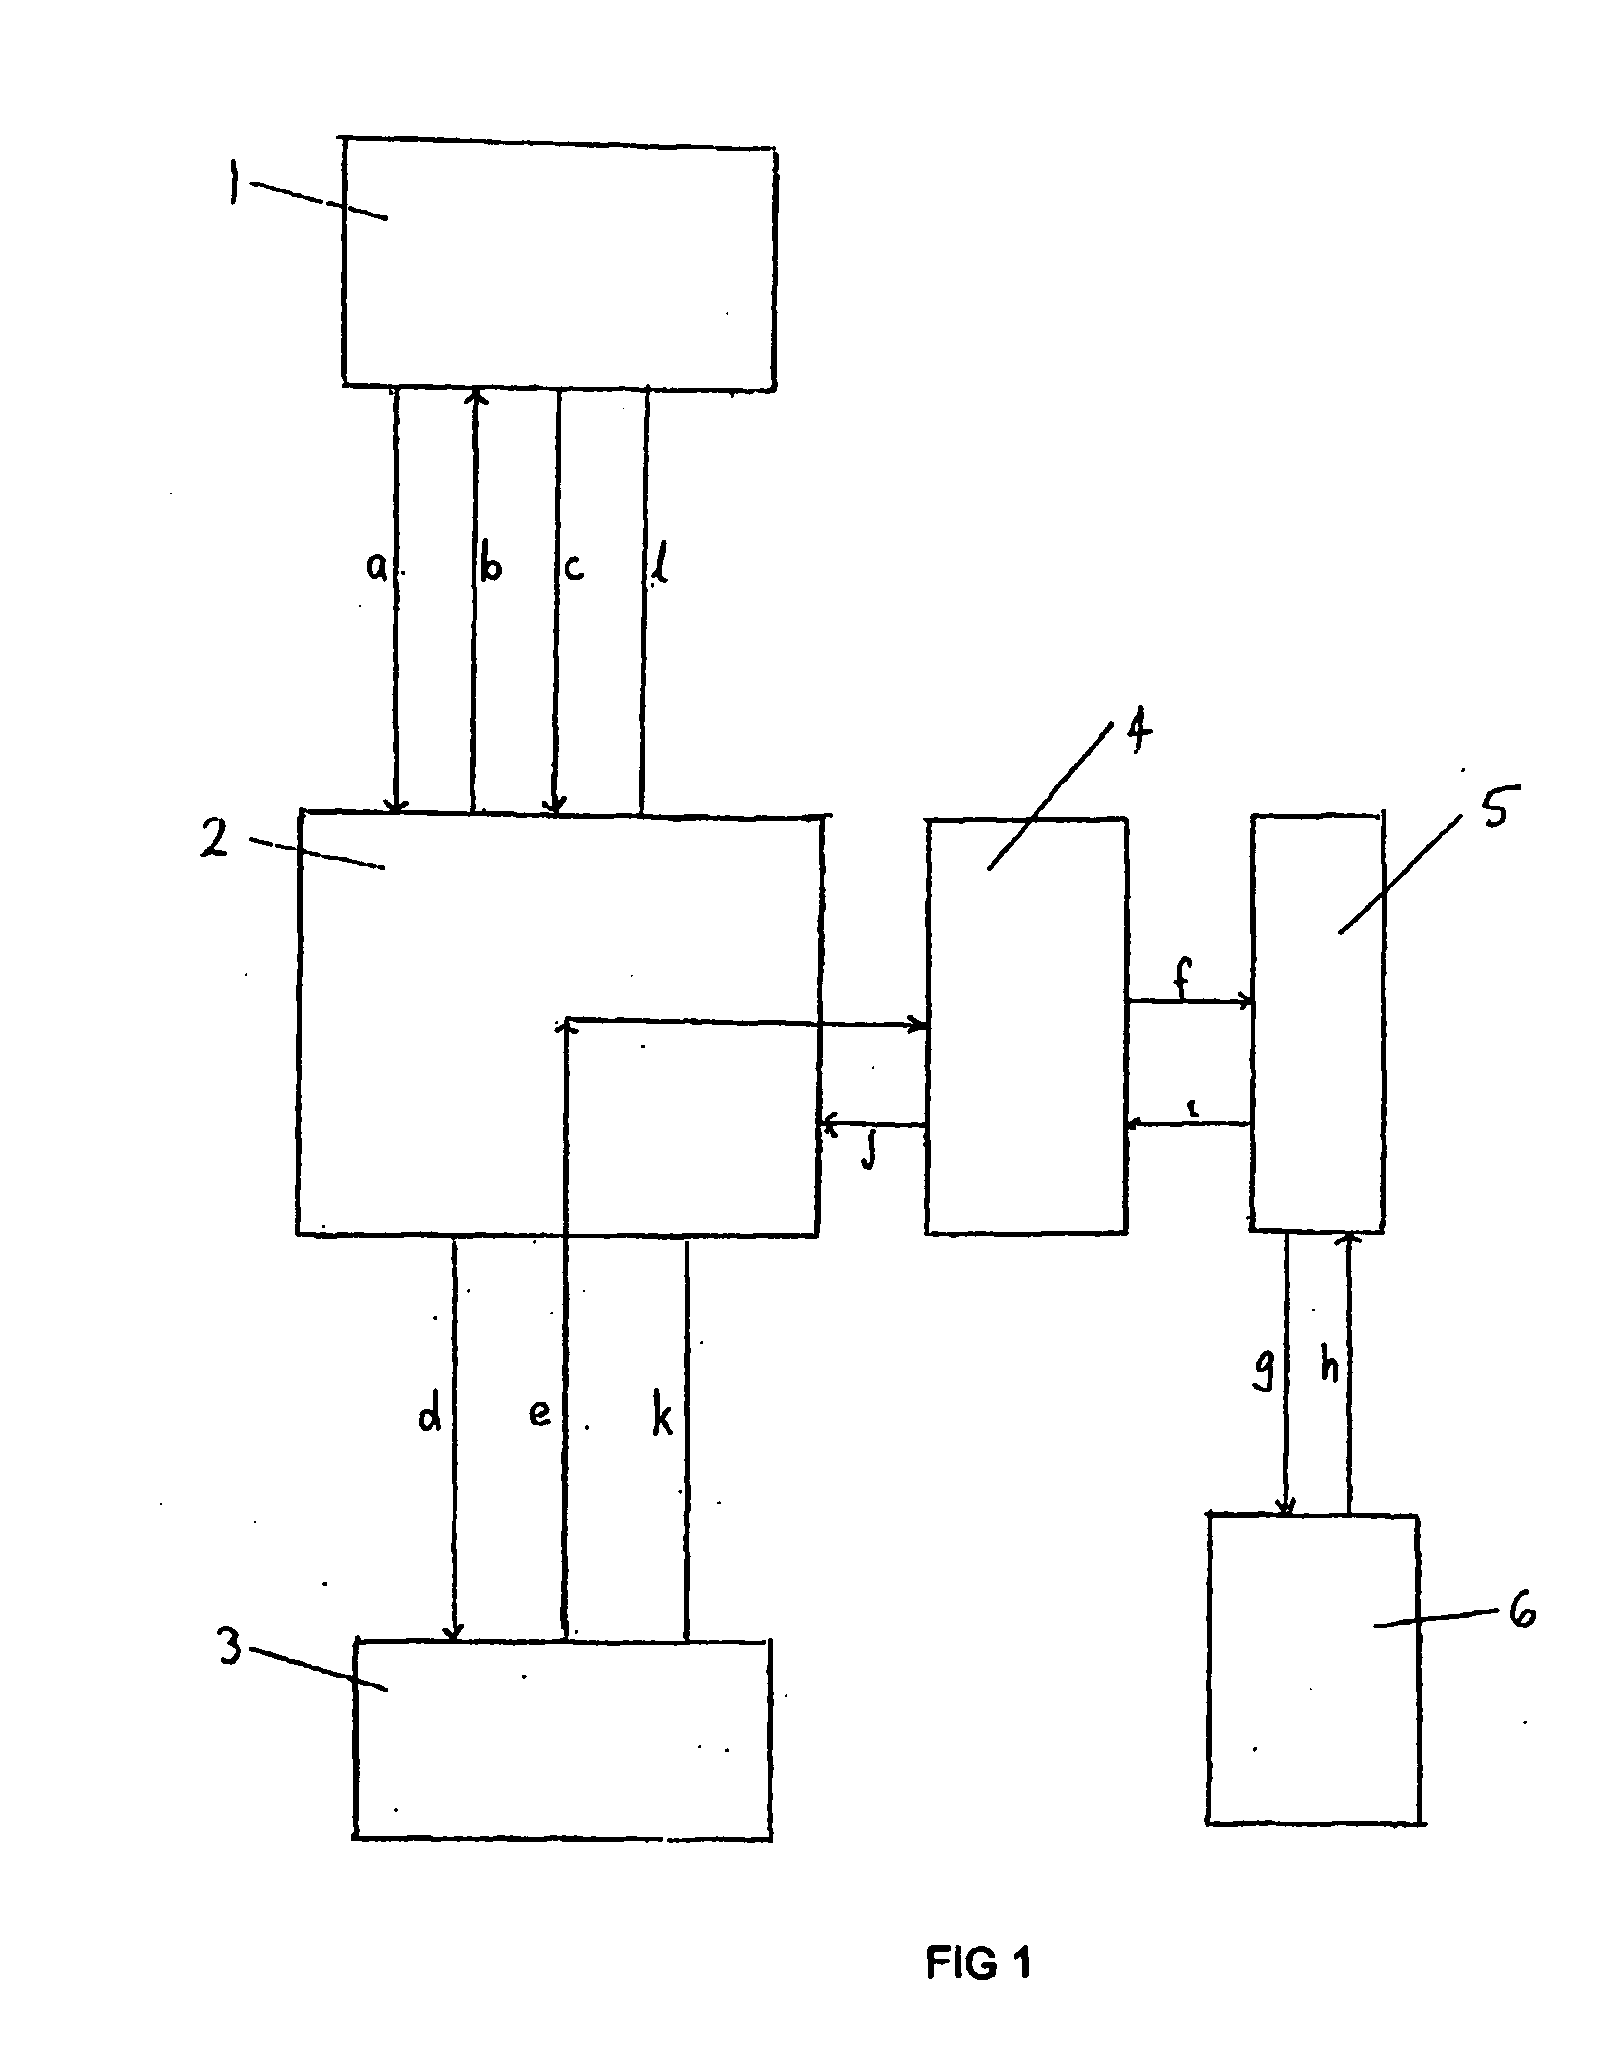 System and method for facilitating electronic financial transactions using a mobile telecommunication device